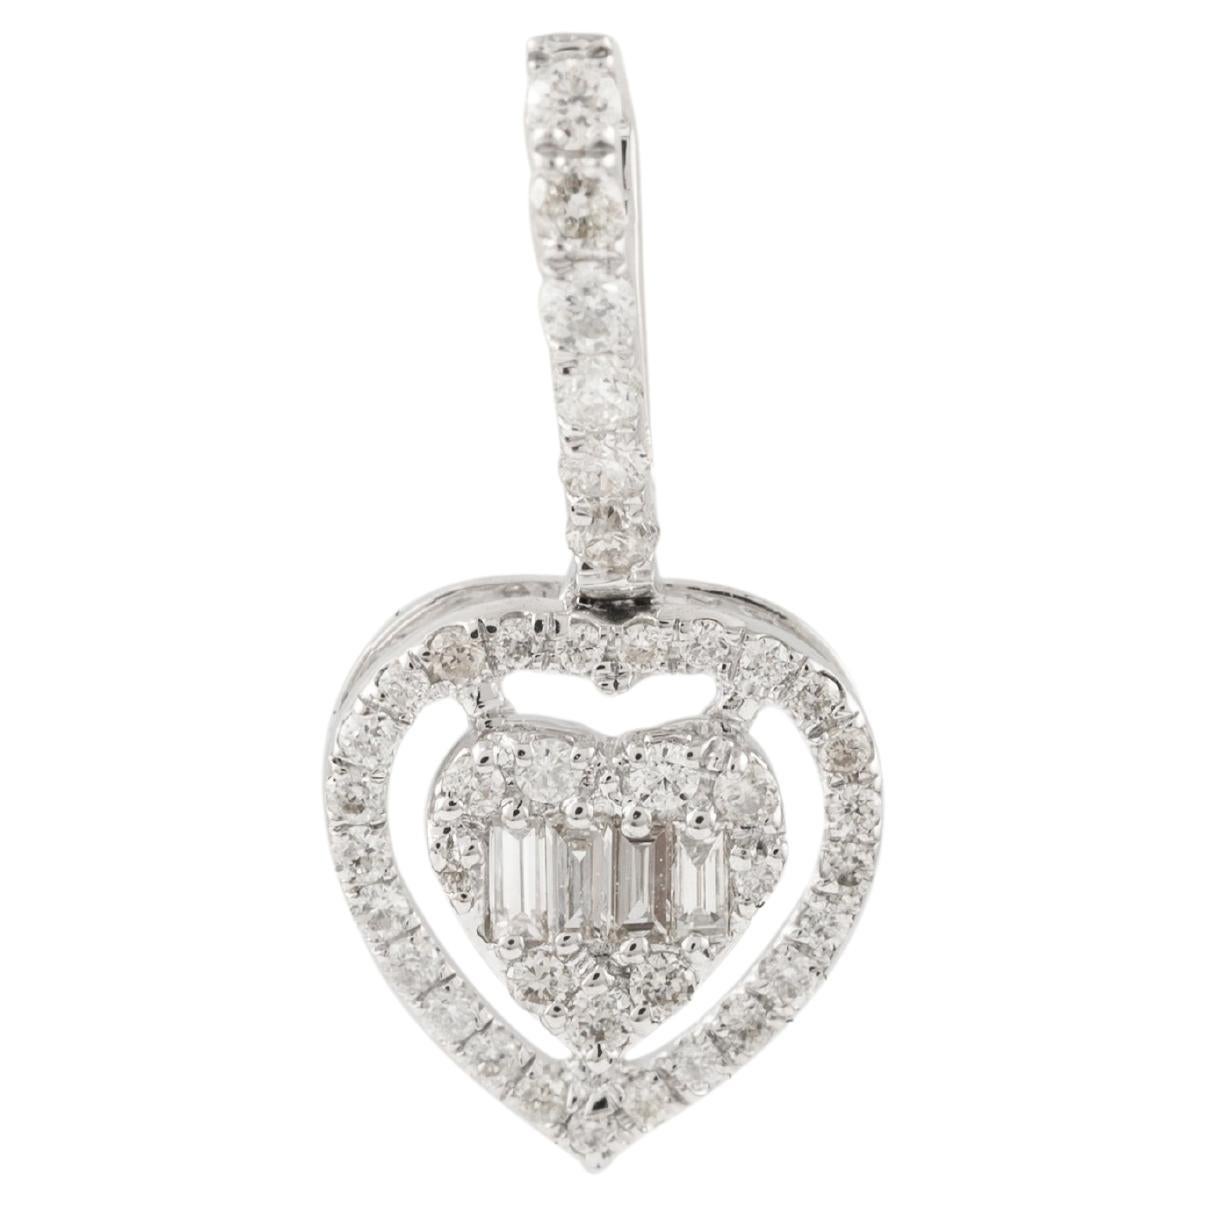 Heart Diamond Pendant 18k Solid White Gold, Fine Jewelry Bride To Be Gift For Sale